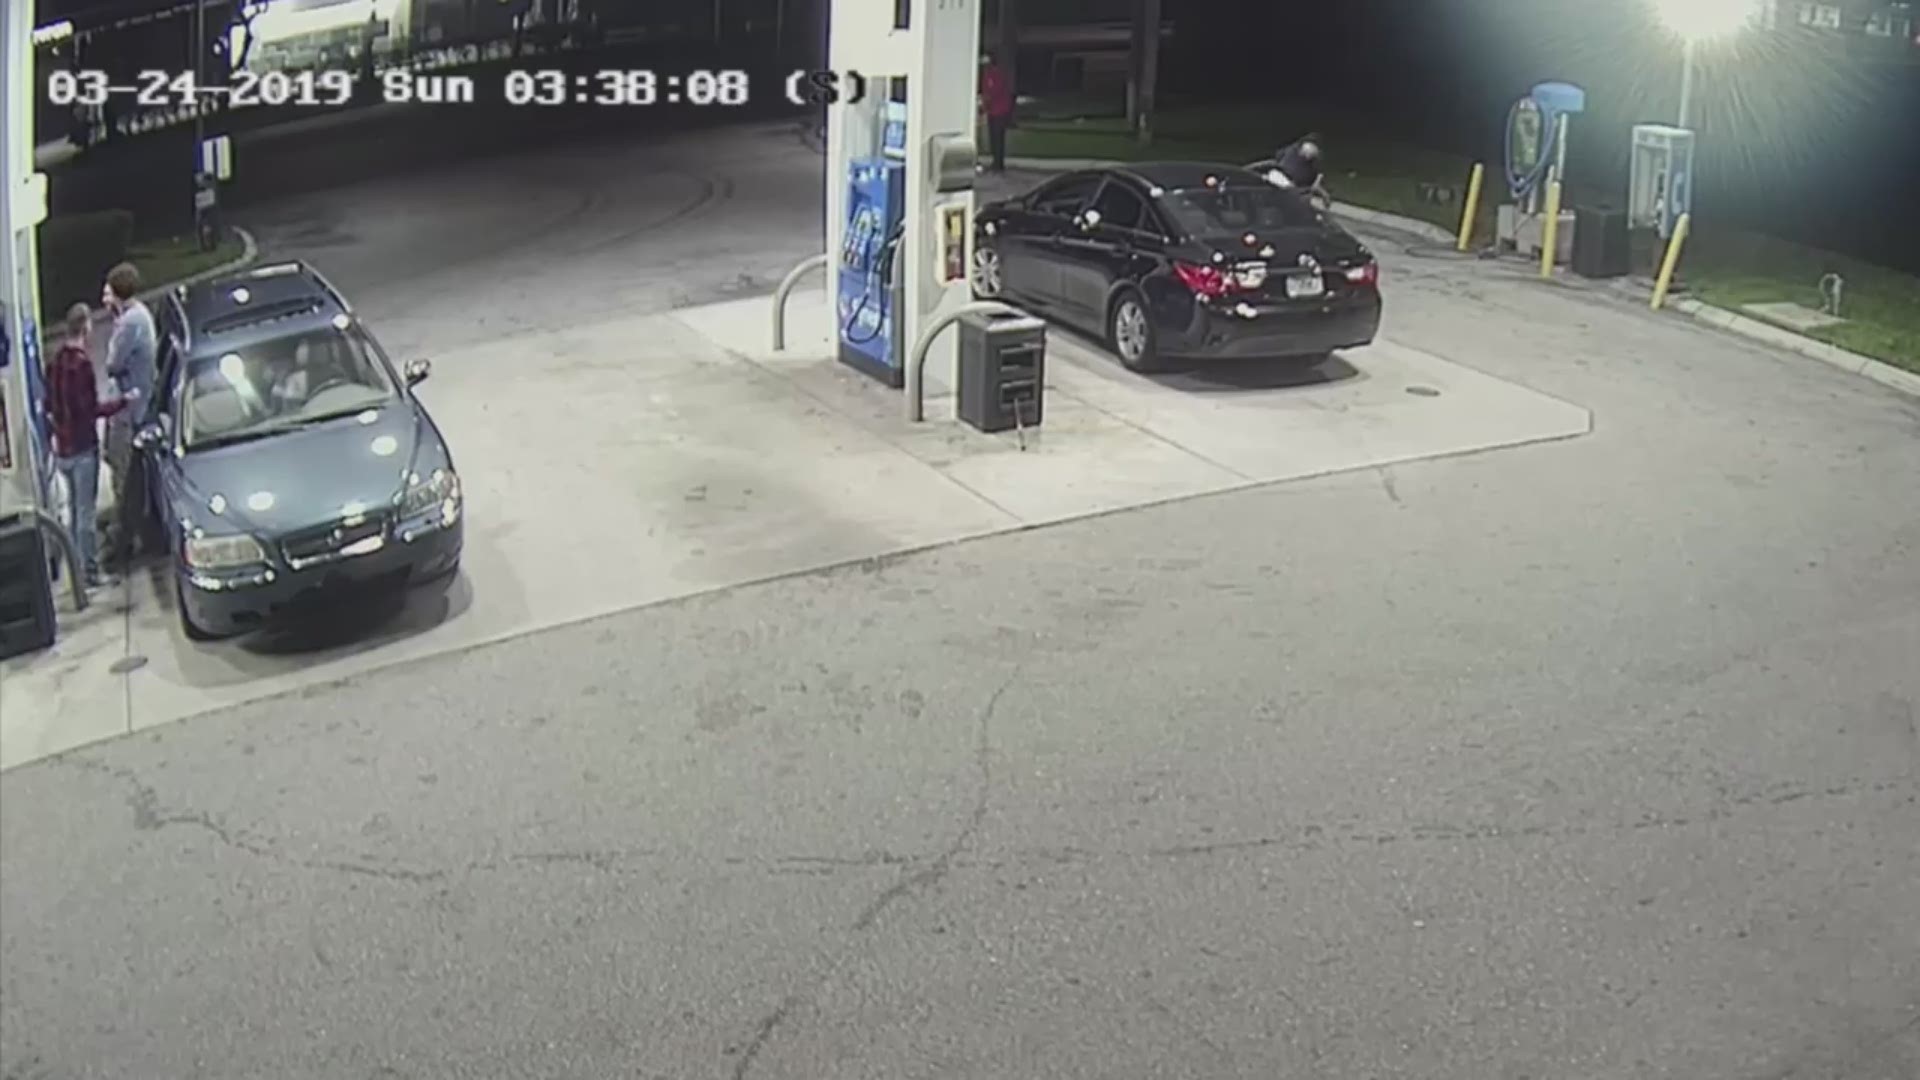 The ordeal happened around 3:35 a.m. Sunday at a gas station in Oakland Park, Florida, which is located in Broward County. (Video: Broward County Sheriff's Office)